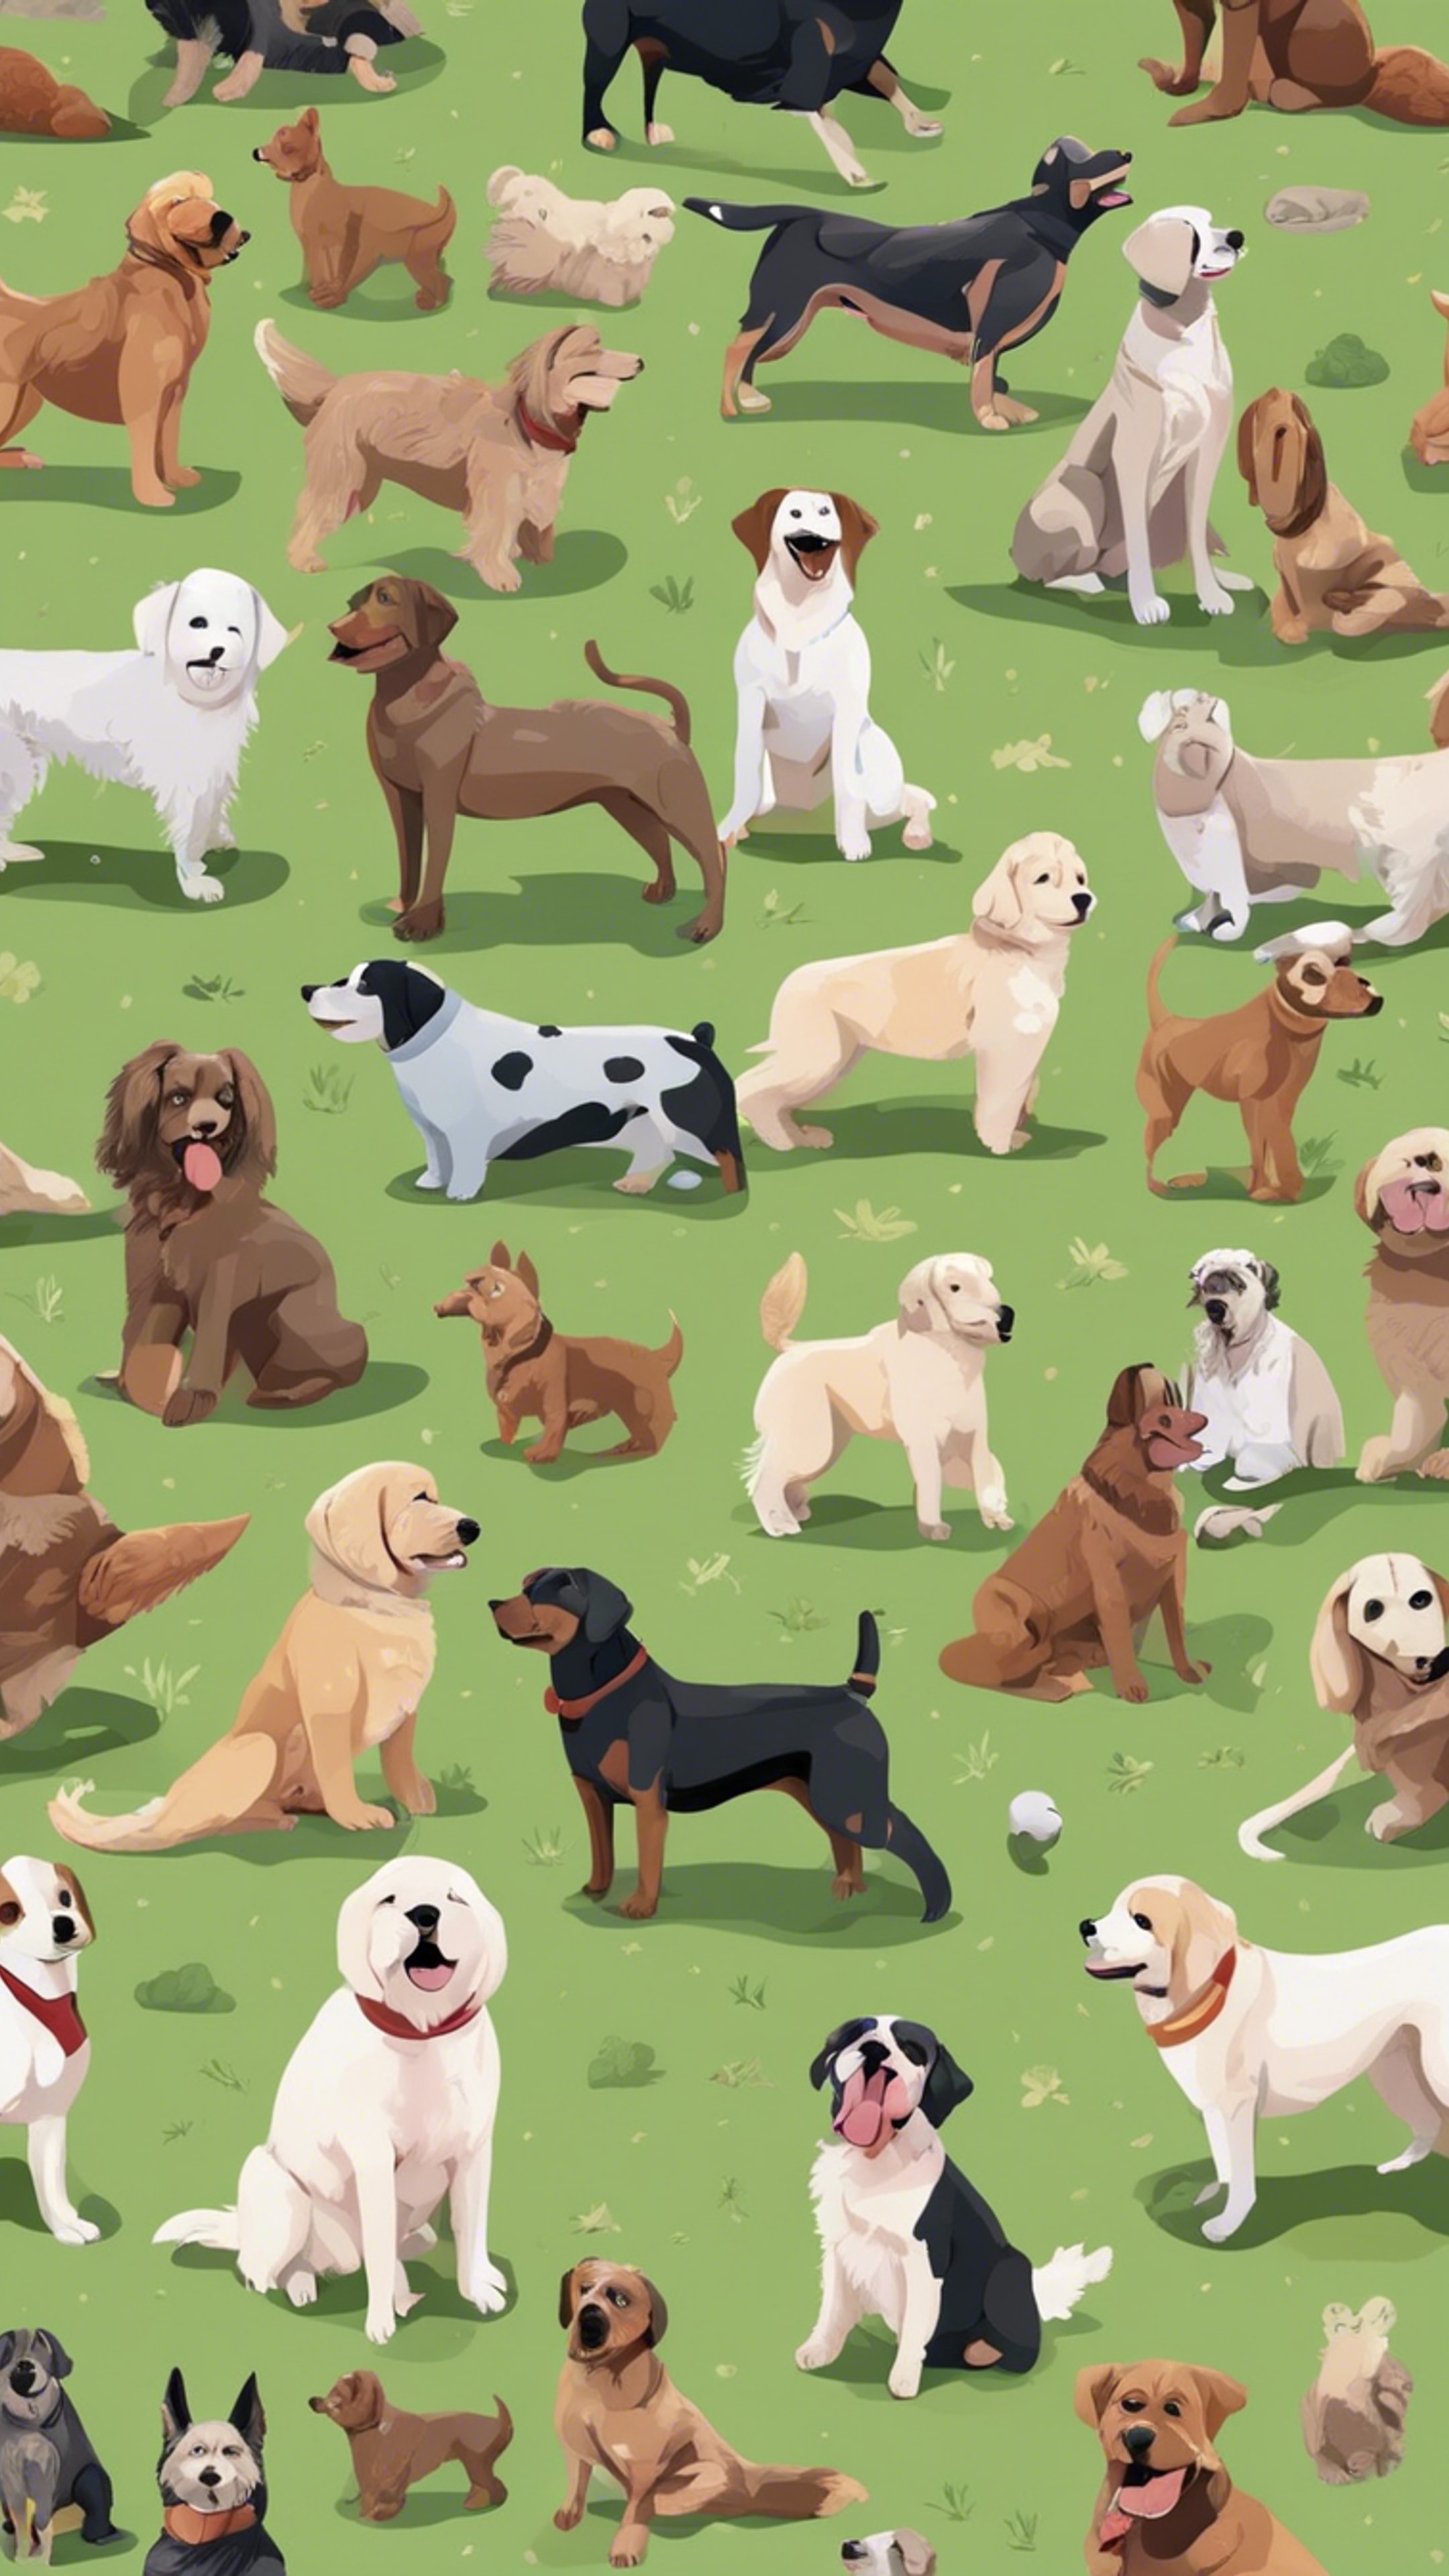 Seamless pattern of various breed of dogs playing in a park. Валлпапер[140058c252ce4edb8a7a]